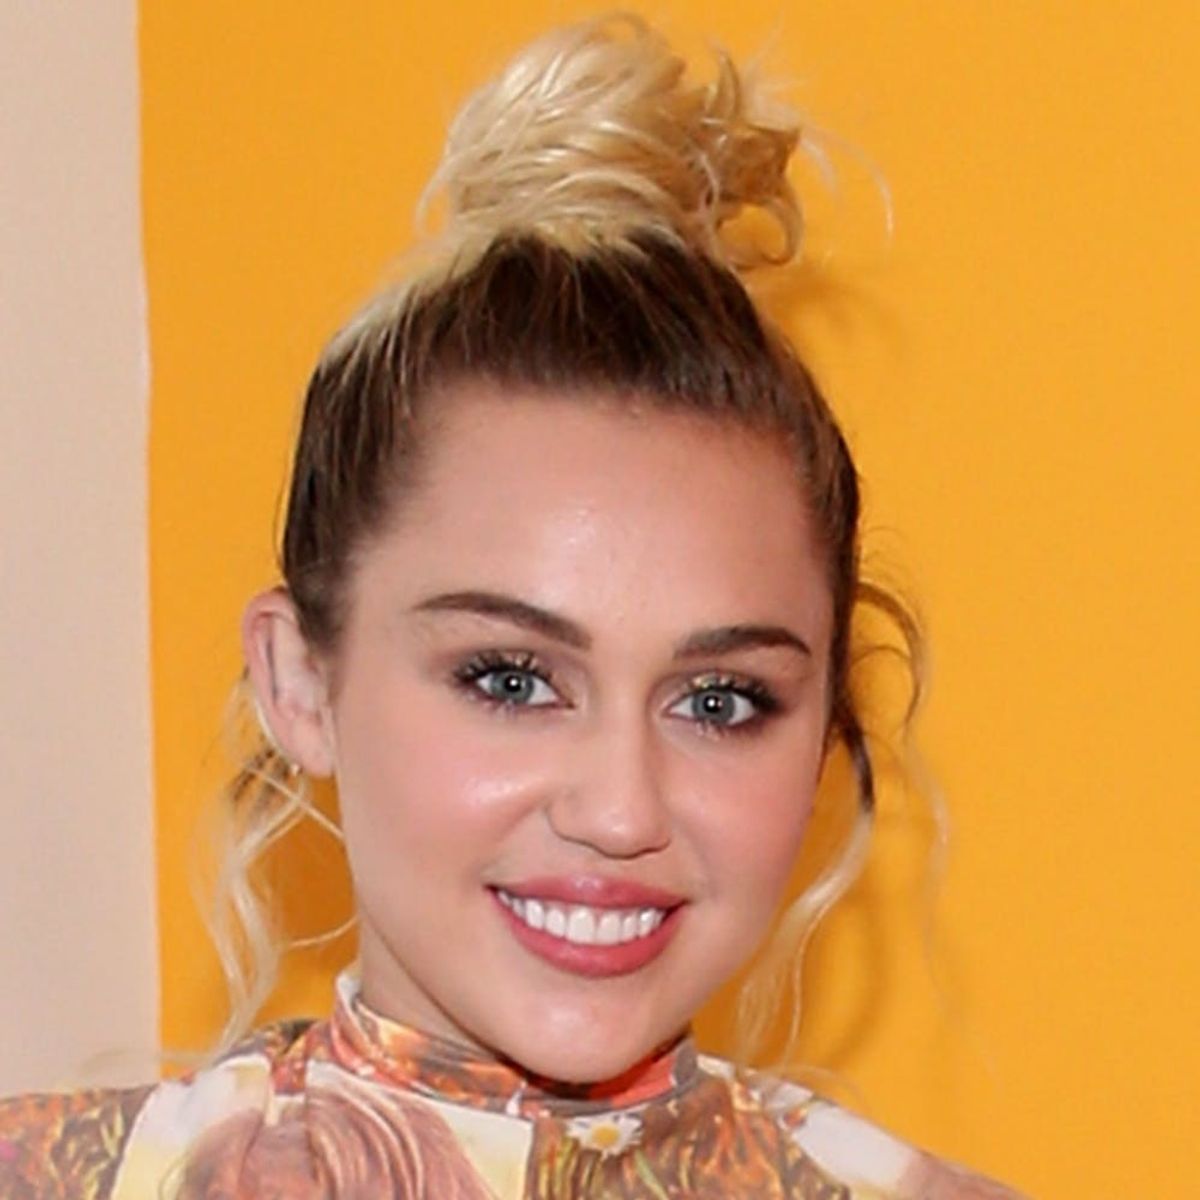 Miley Cyrus Feels “Genderless” and “Ageless”